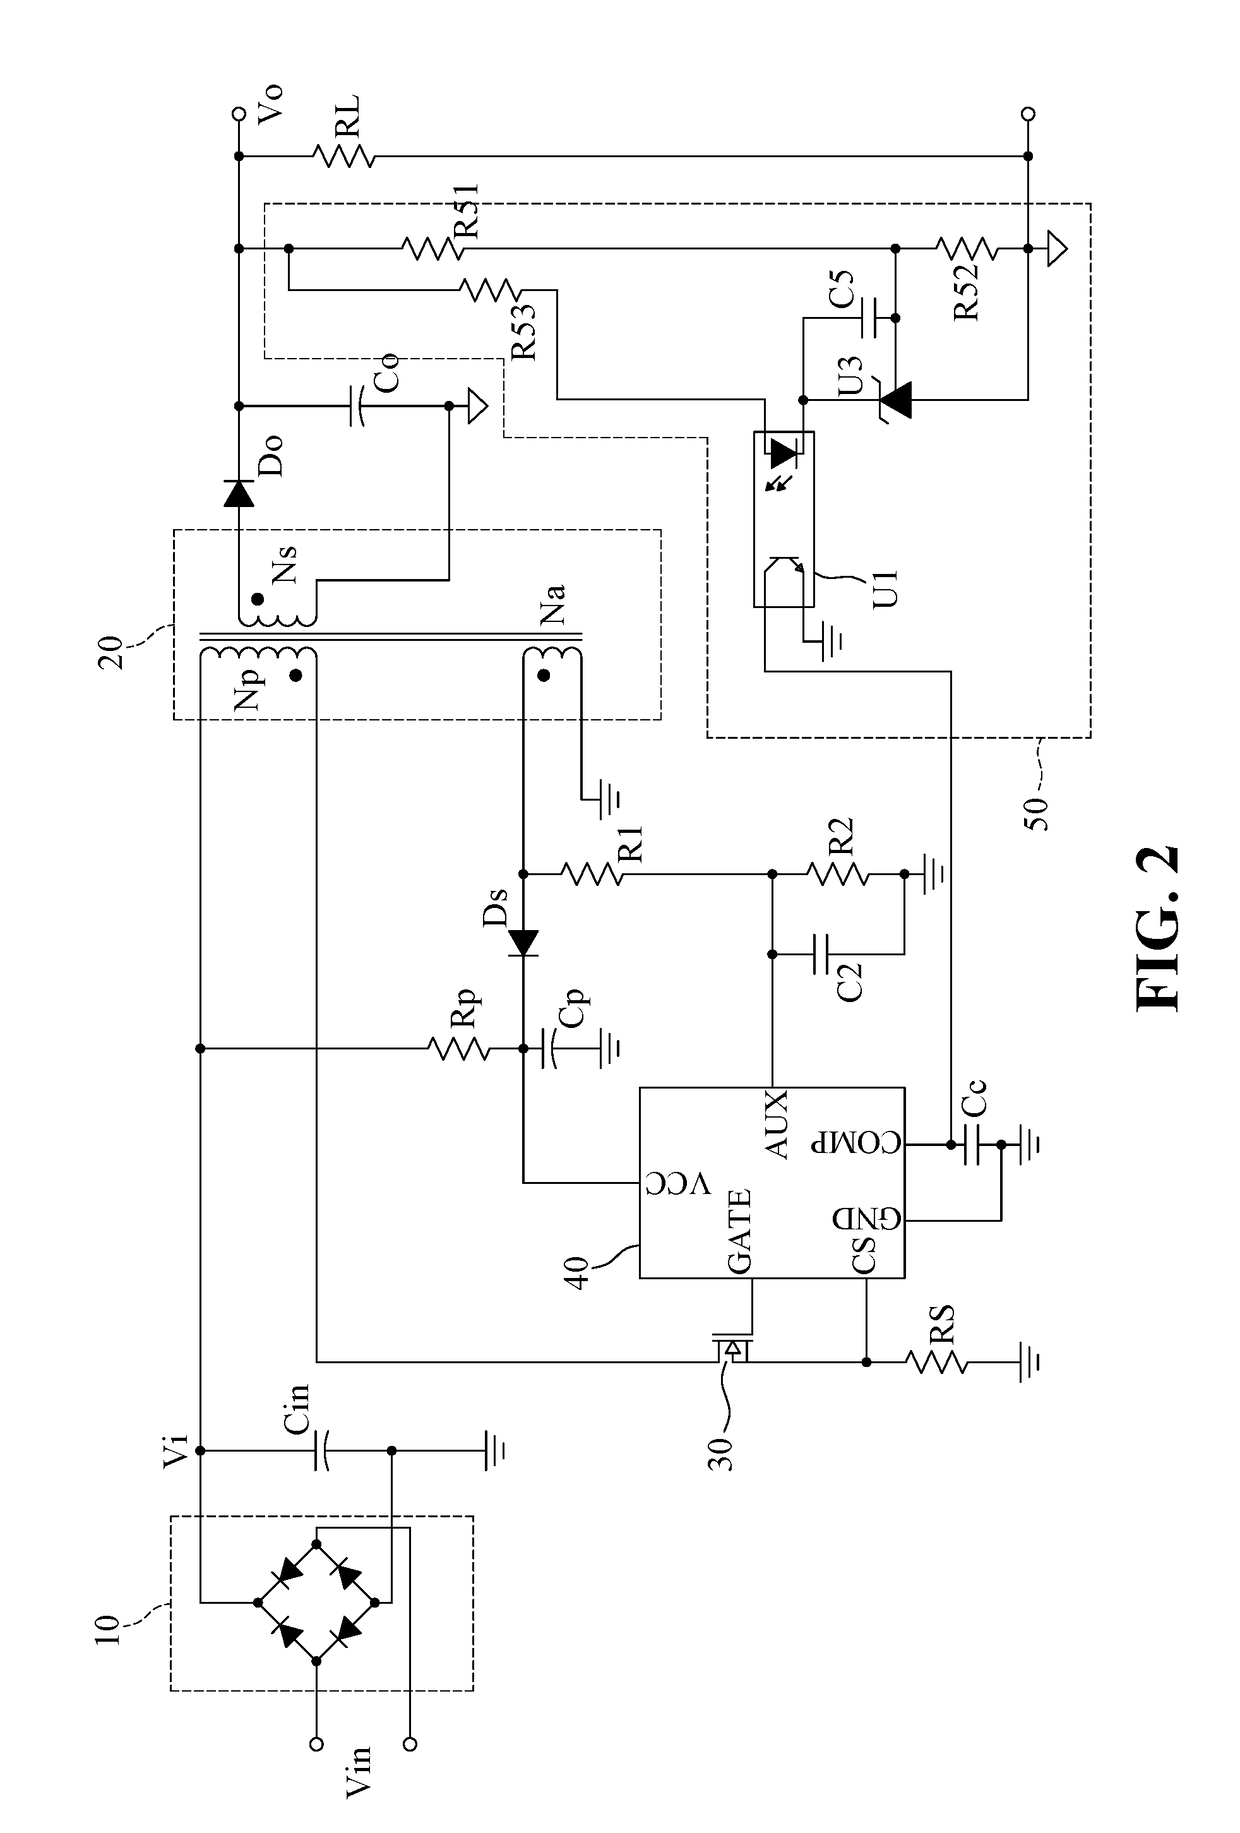 Pwm controller with programmable switching frequency for psr/ssr flyback converter